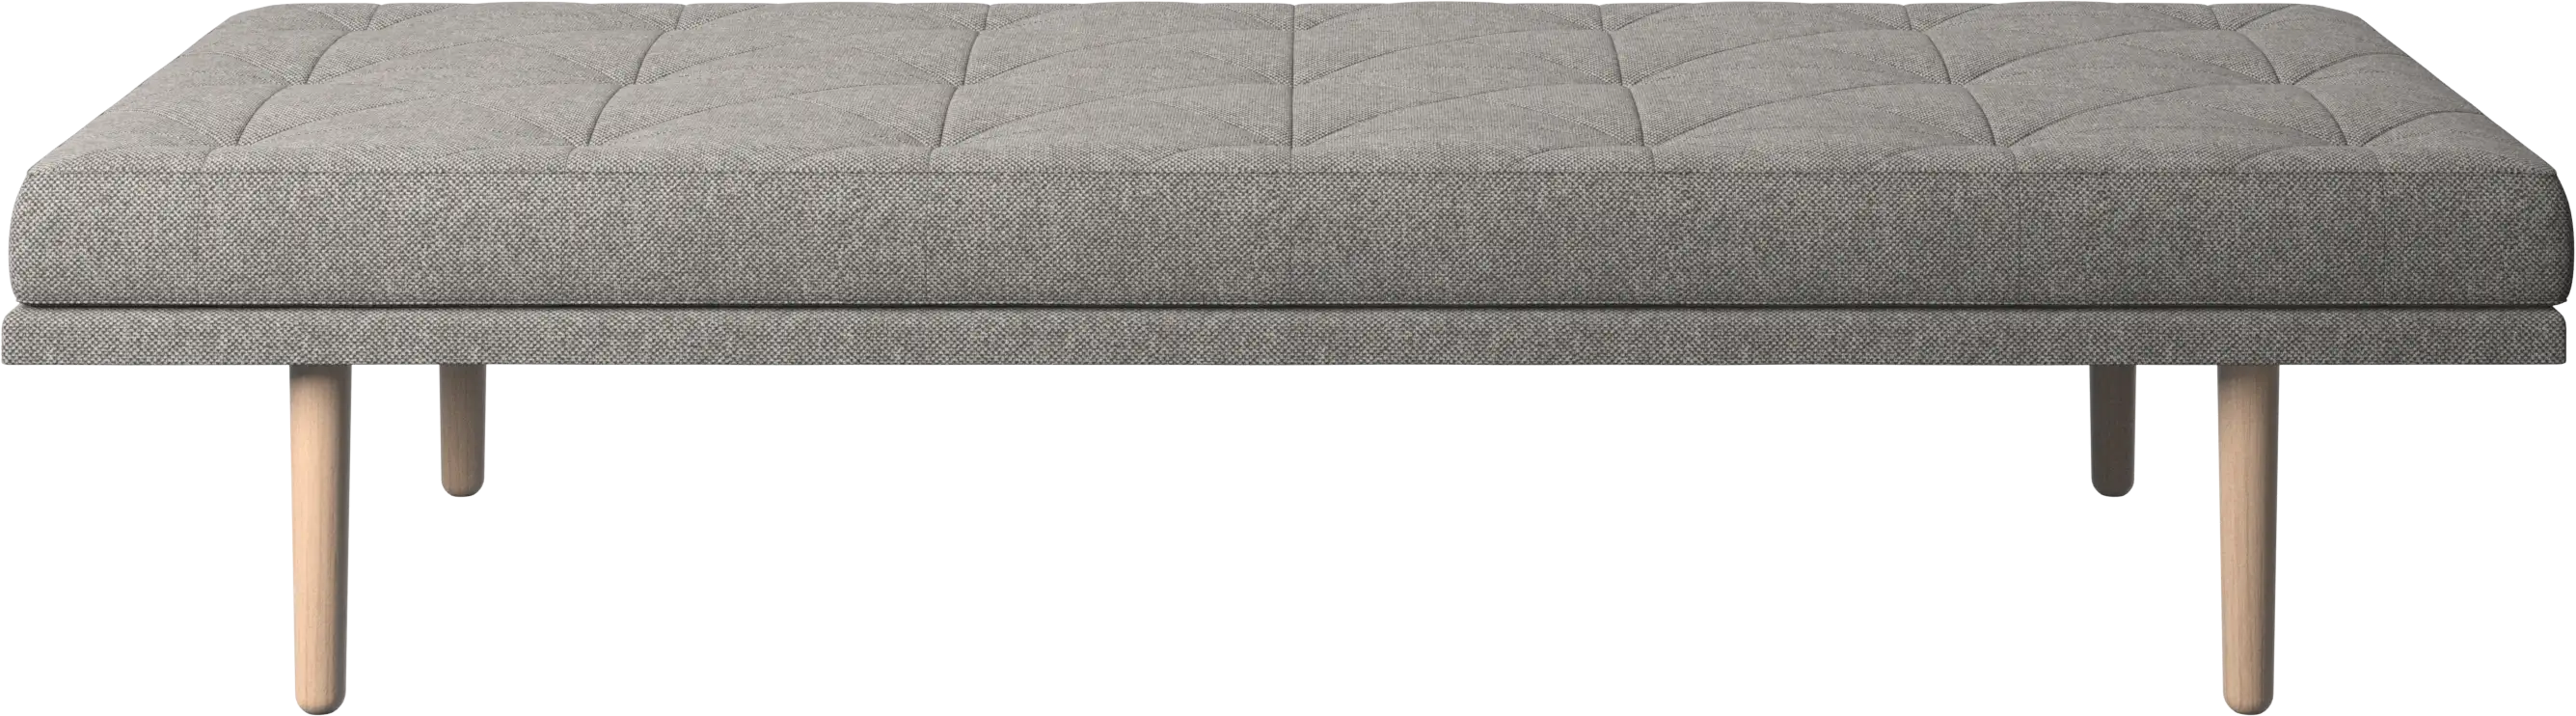 fusion day bed